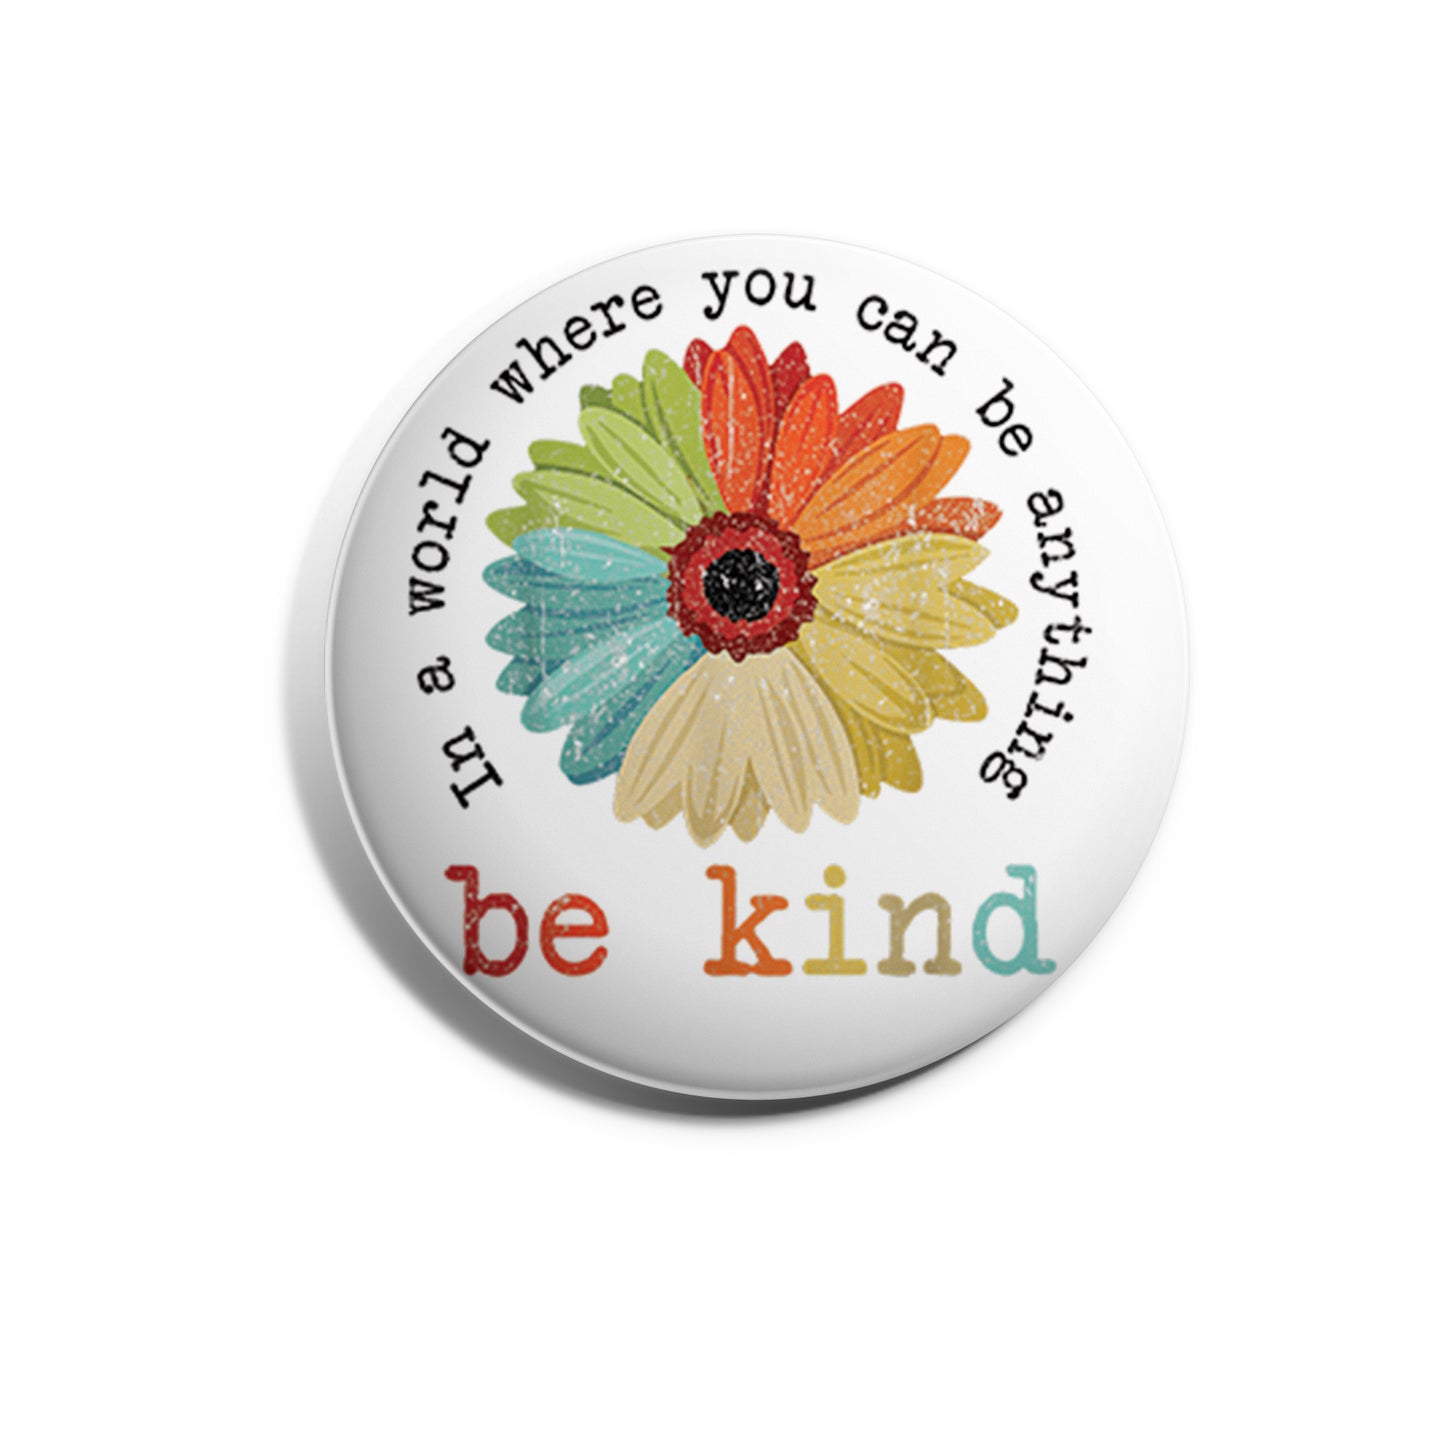 In a World Where You Can Be Anything, Be Kind